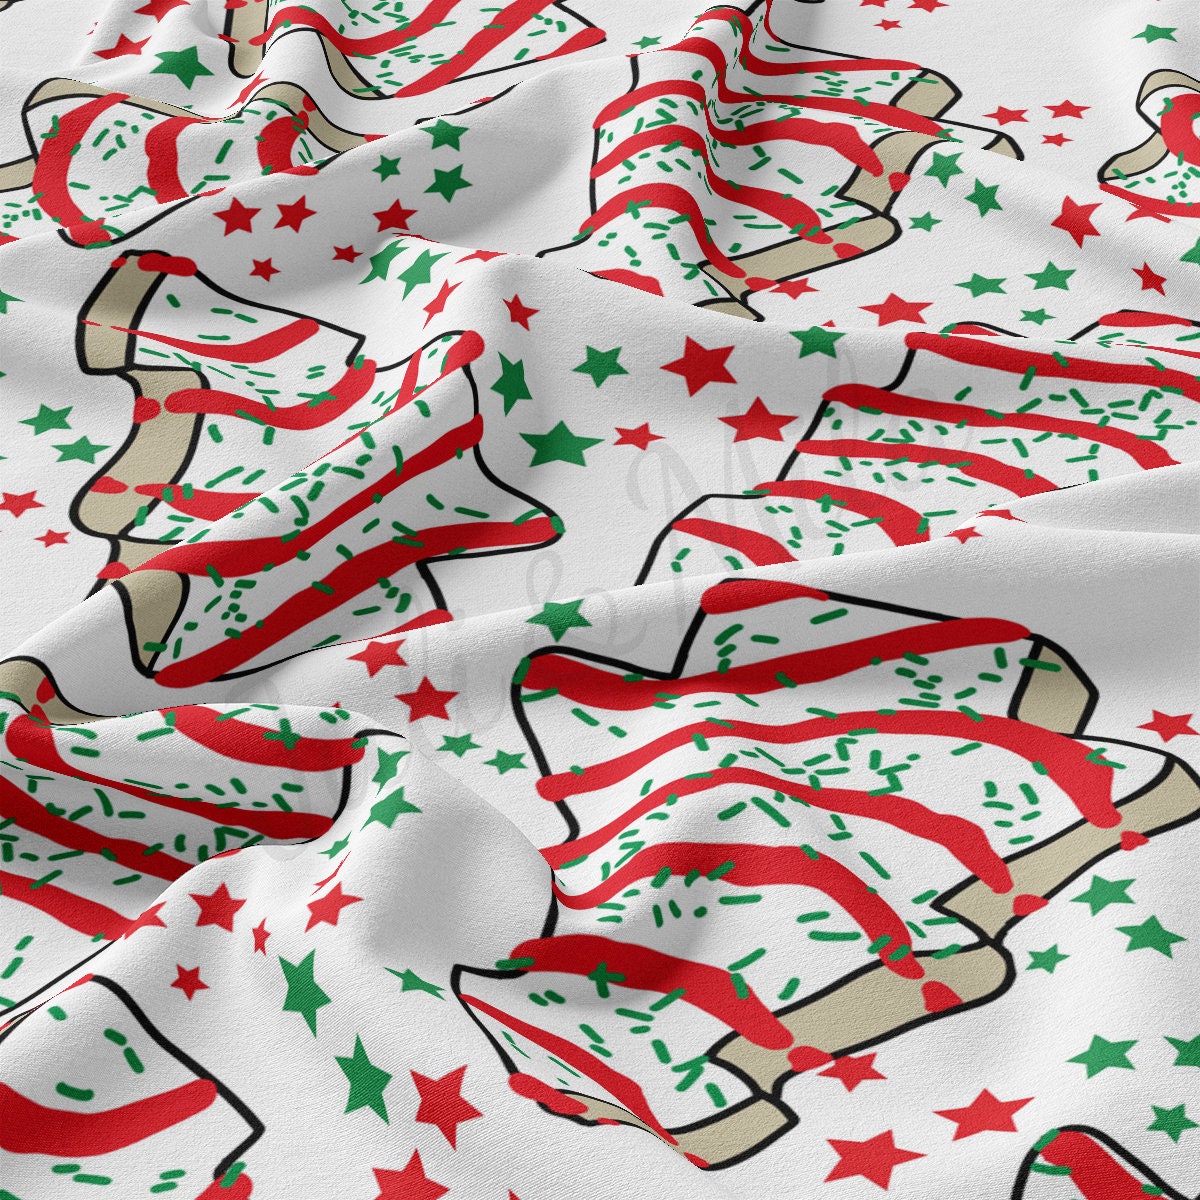 Christmas CakesDouble Brushed Polyester Fabric DBP1976